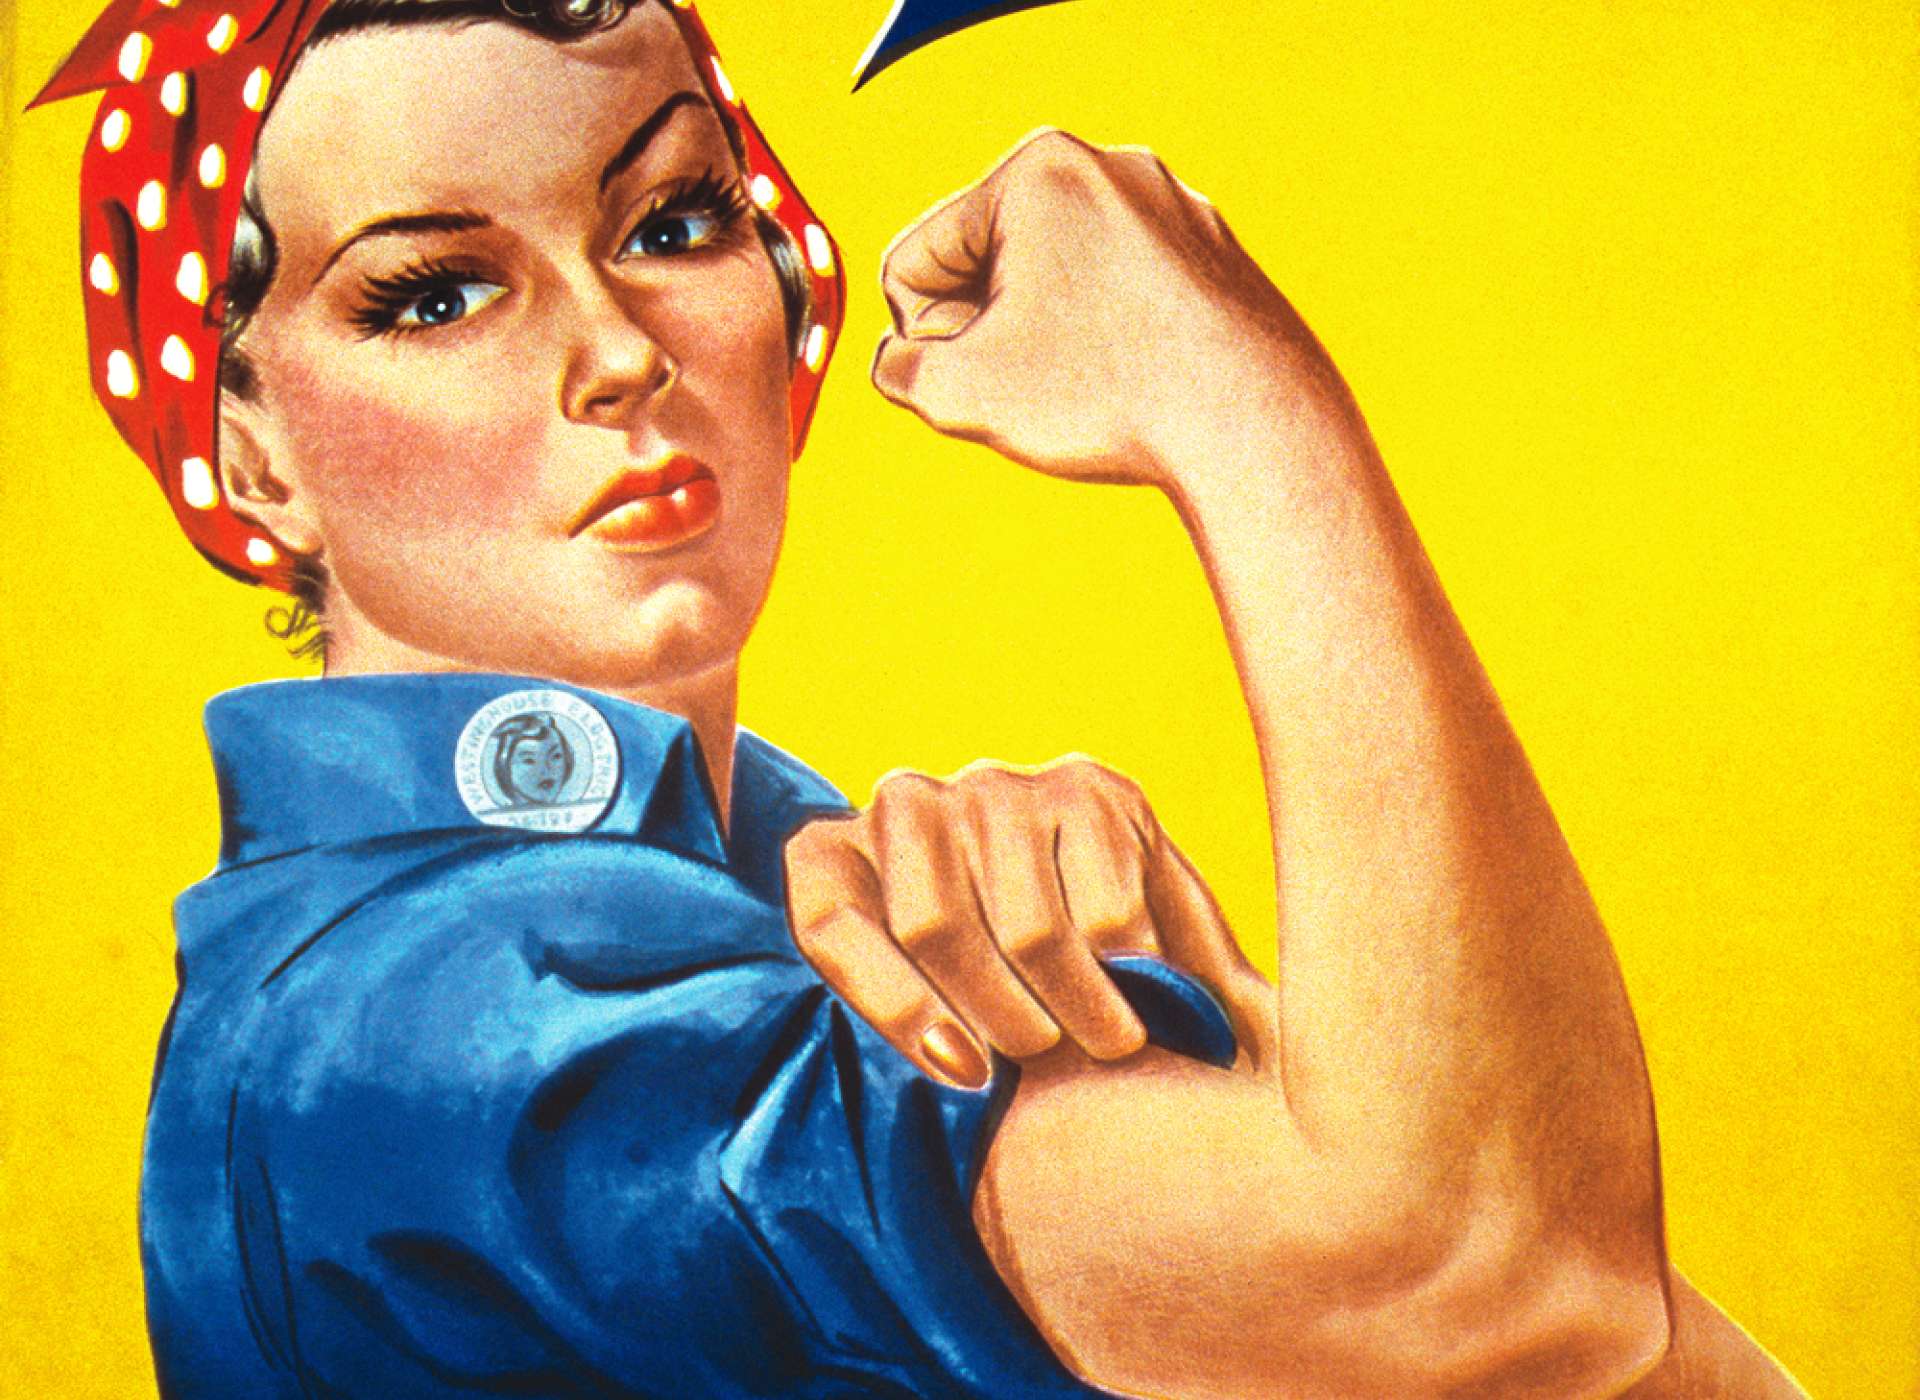 “We Can Do It!” poster for Westinghouse, closely associated with Rosie the Riveter, although not a depiction of the cultural icon itself.